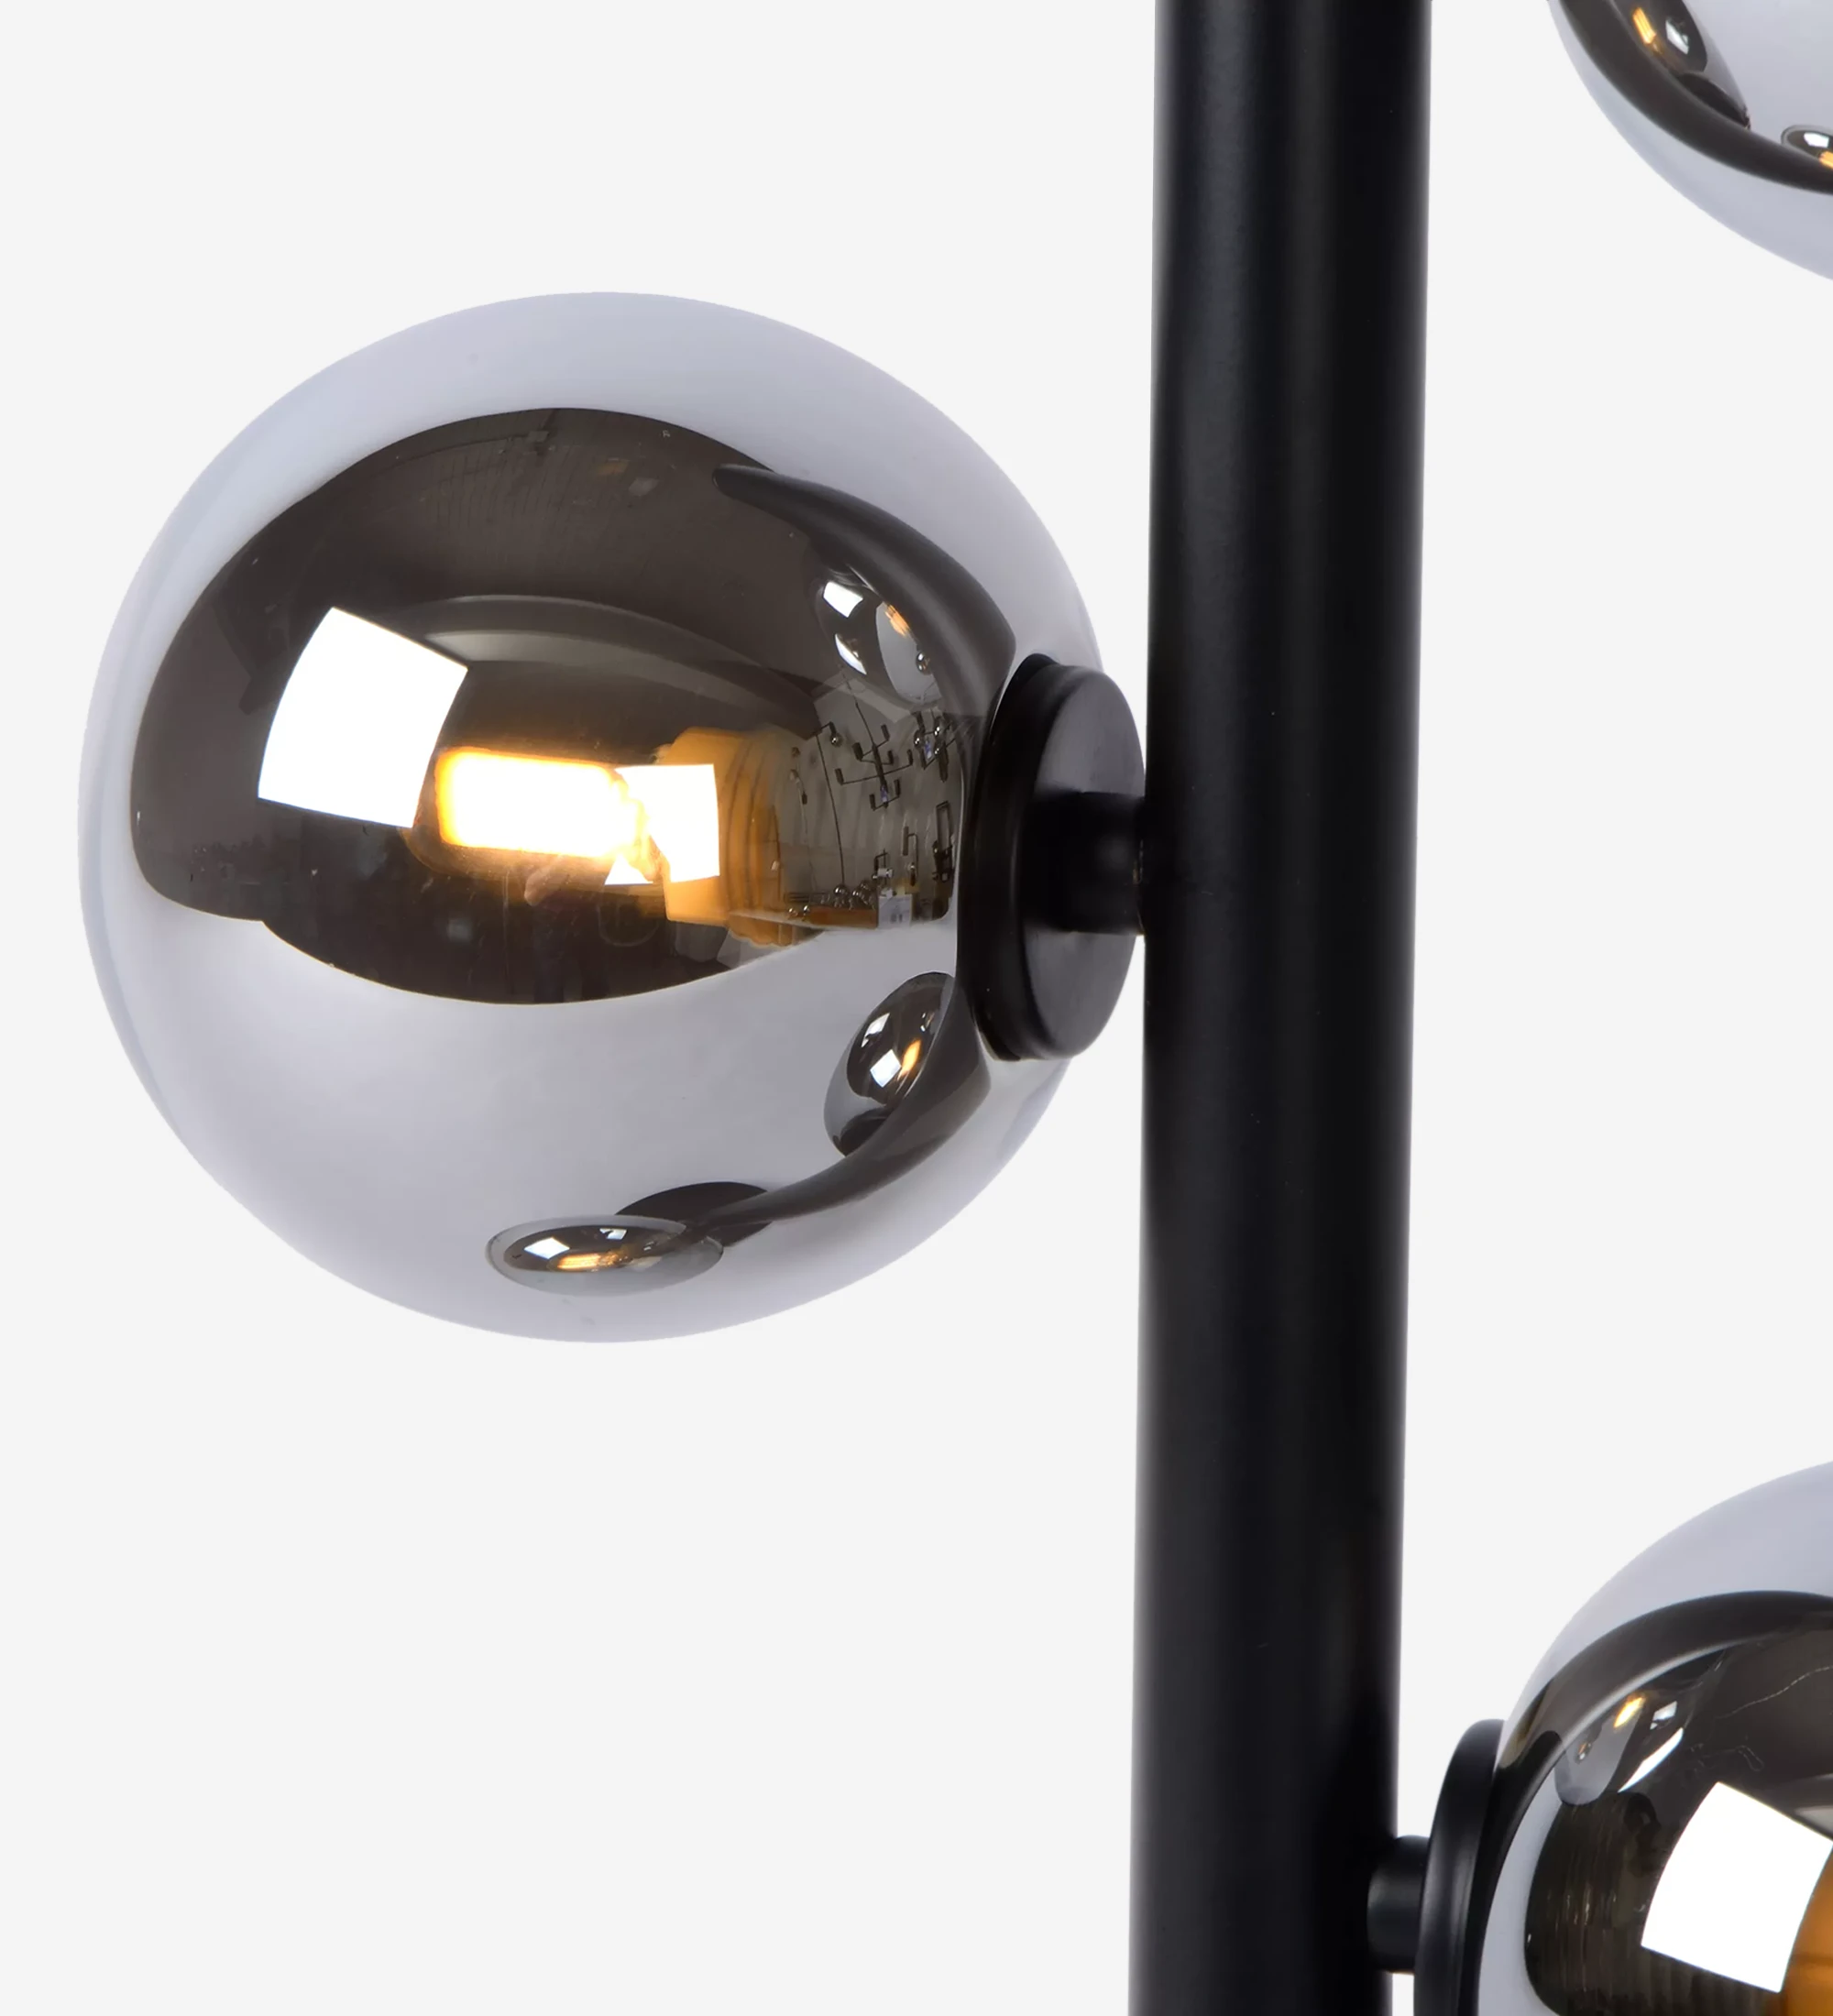 Table lamp in black steel and smoky glass diffusers.